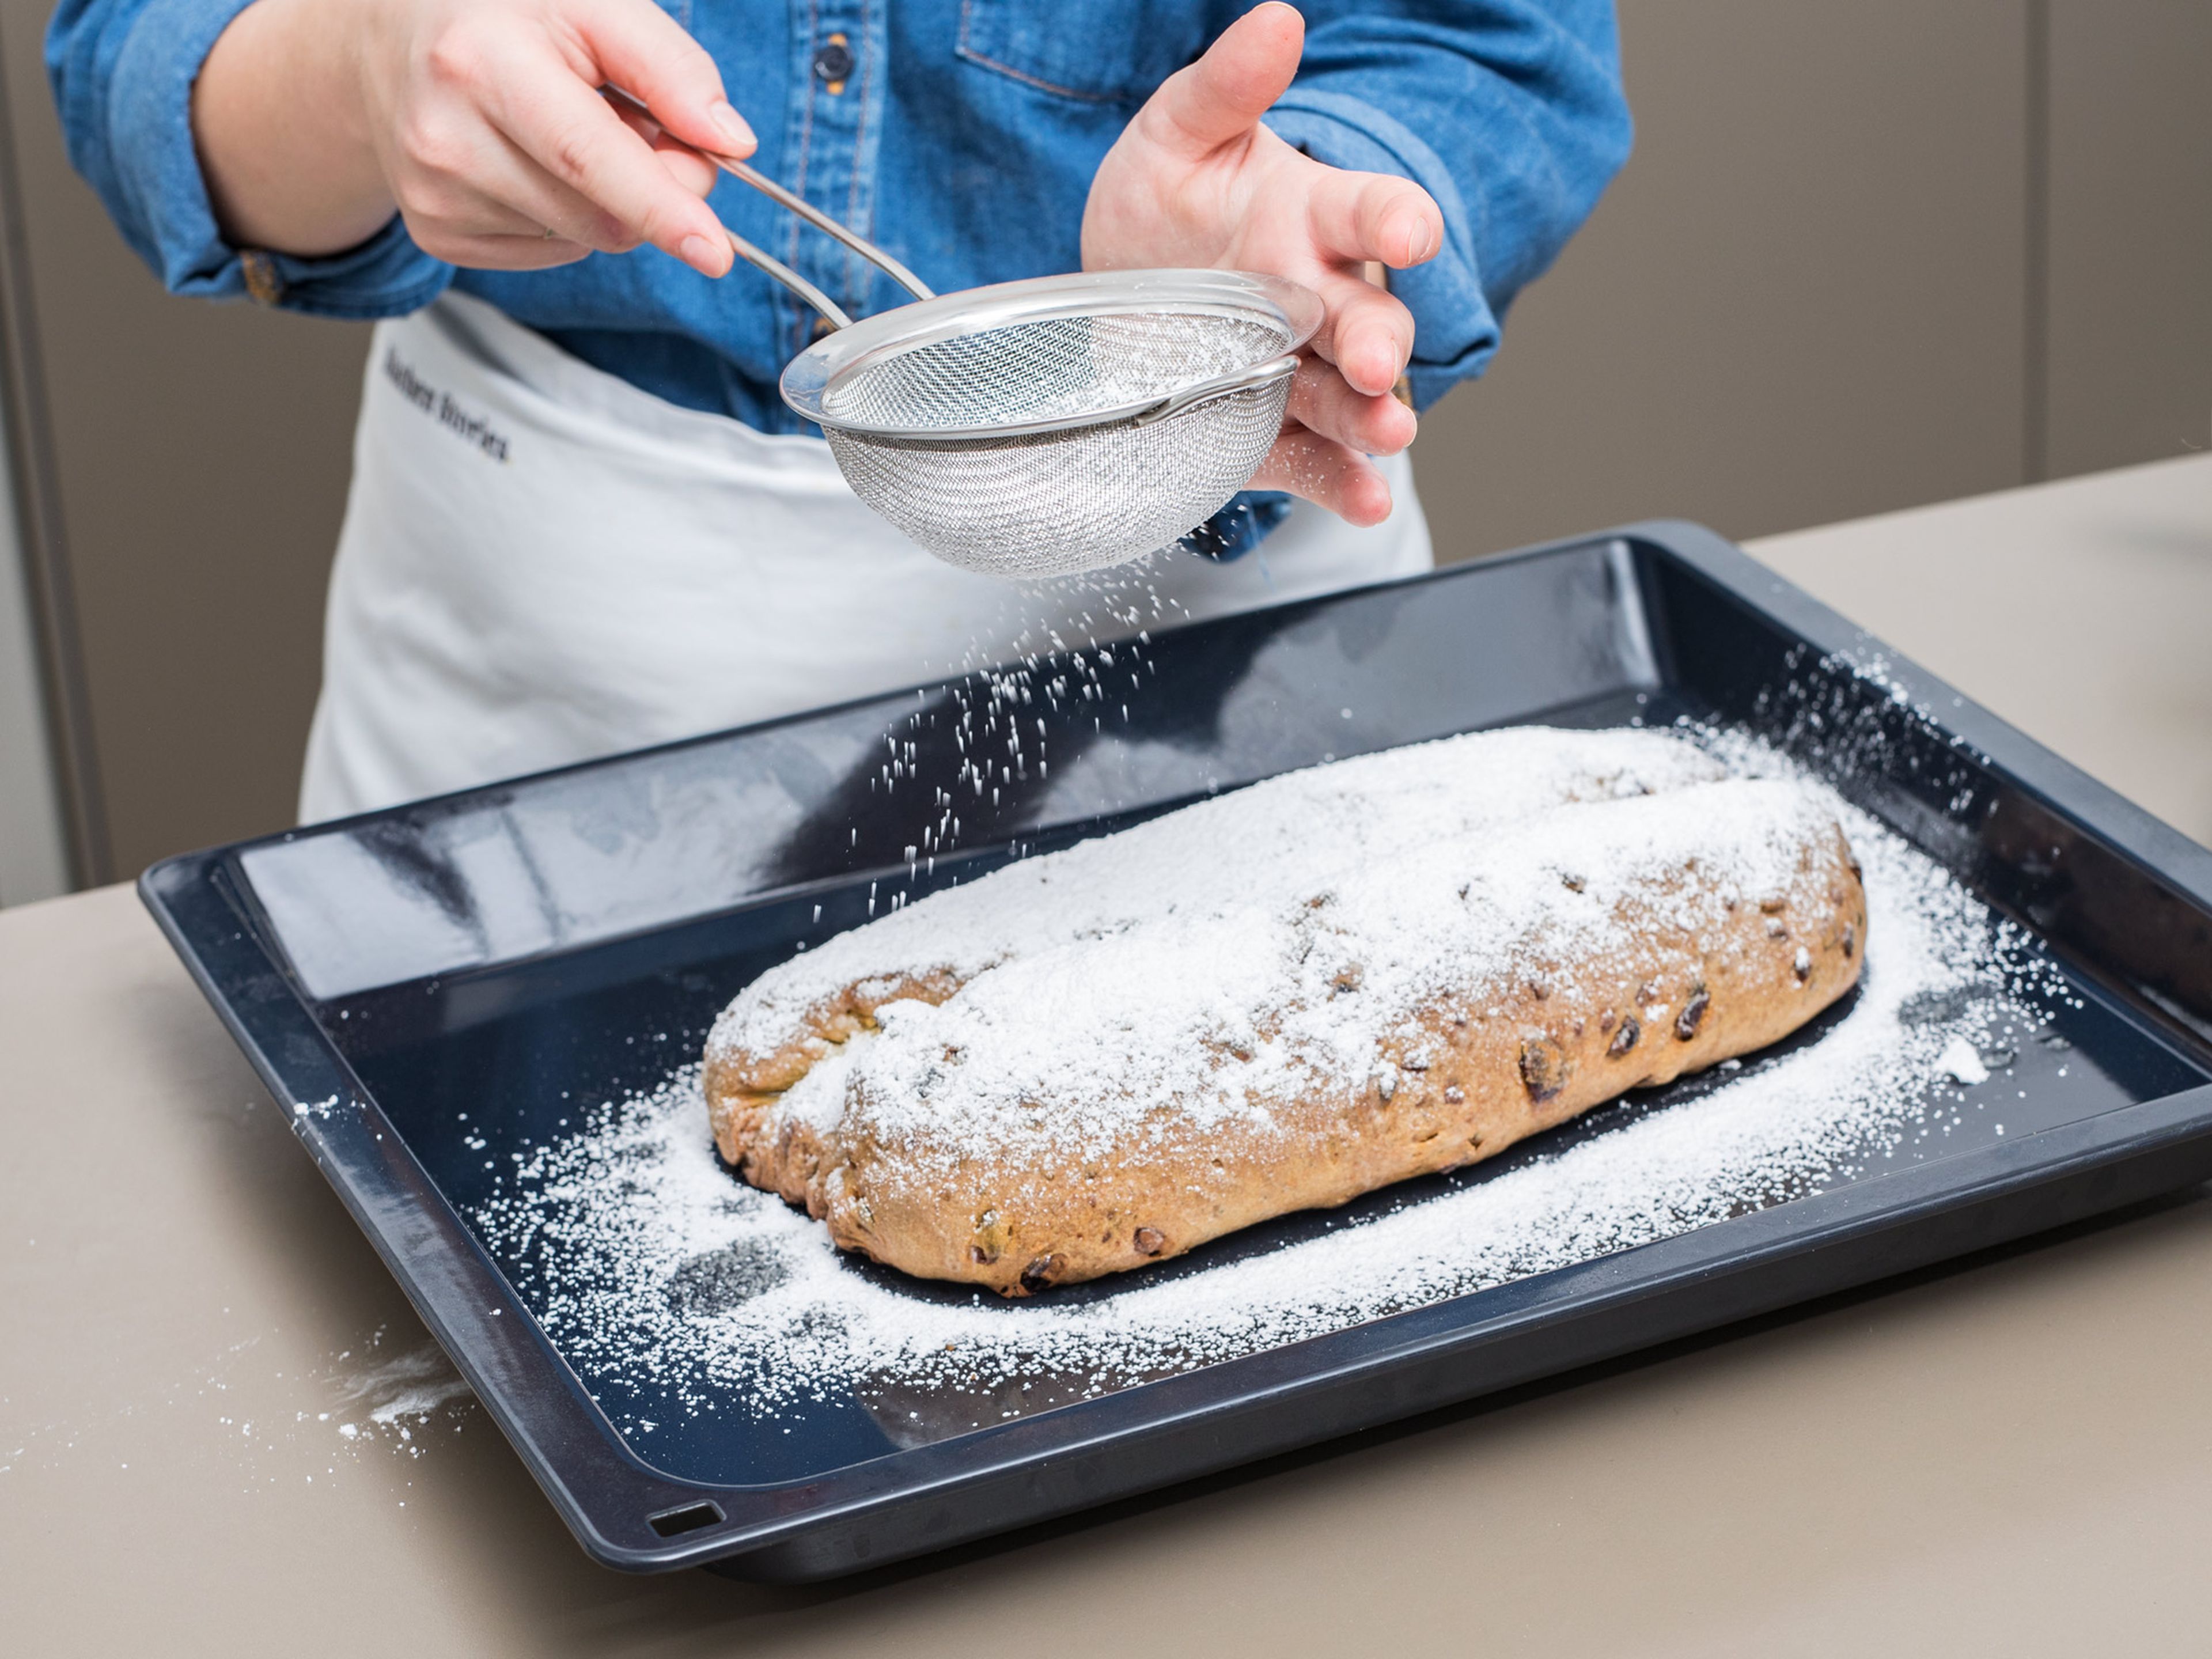 Melt butter in a small saucepan. Once stollen is golden brown all over, remove from oven and brush with melted butter. Dust with a thick layer of confectioner’s sugar. Repeat once more with the butter and confectioner’s sugar. Enjoy!